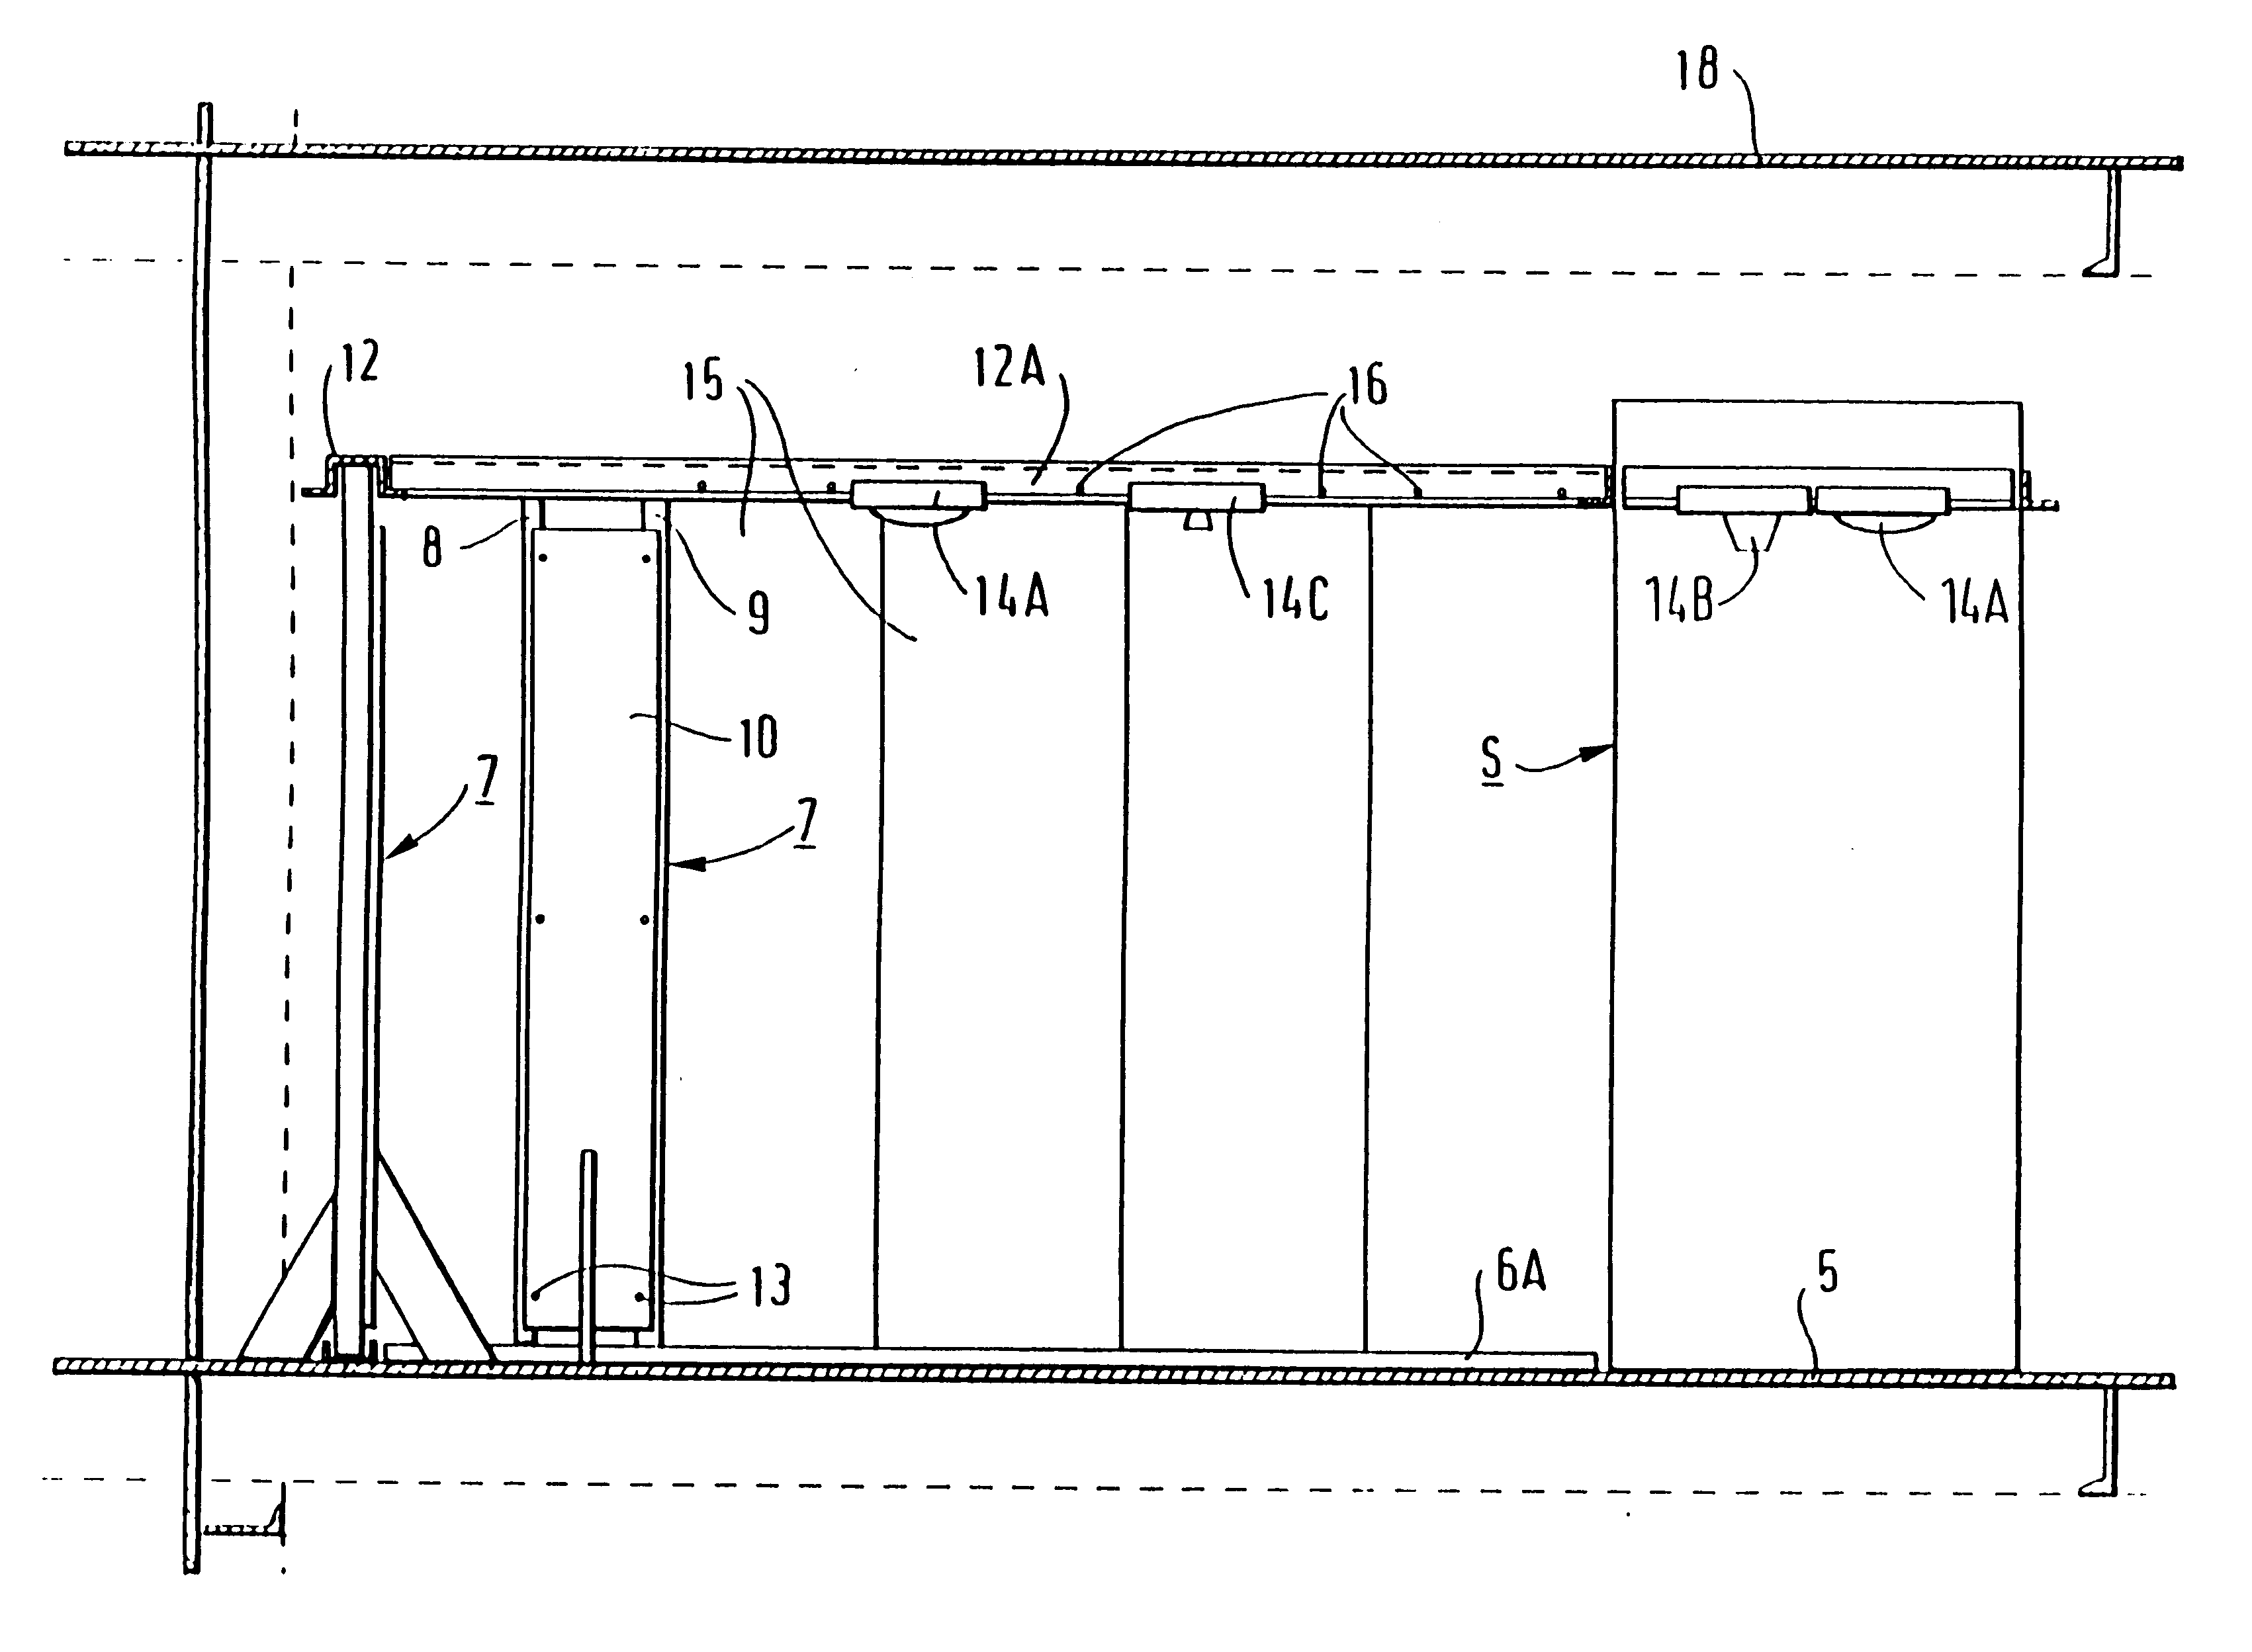 Method of installing ships cabin wall panels and a support for use in the method